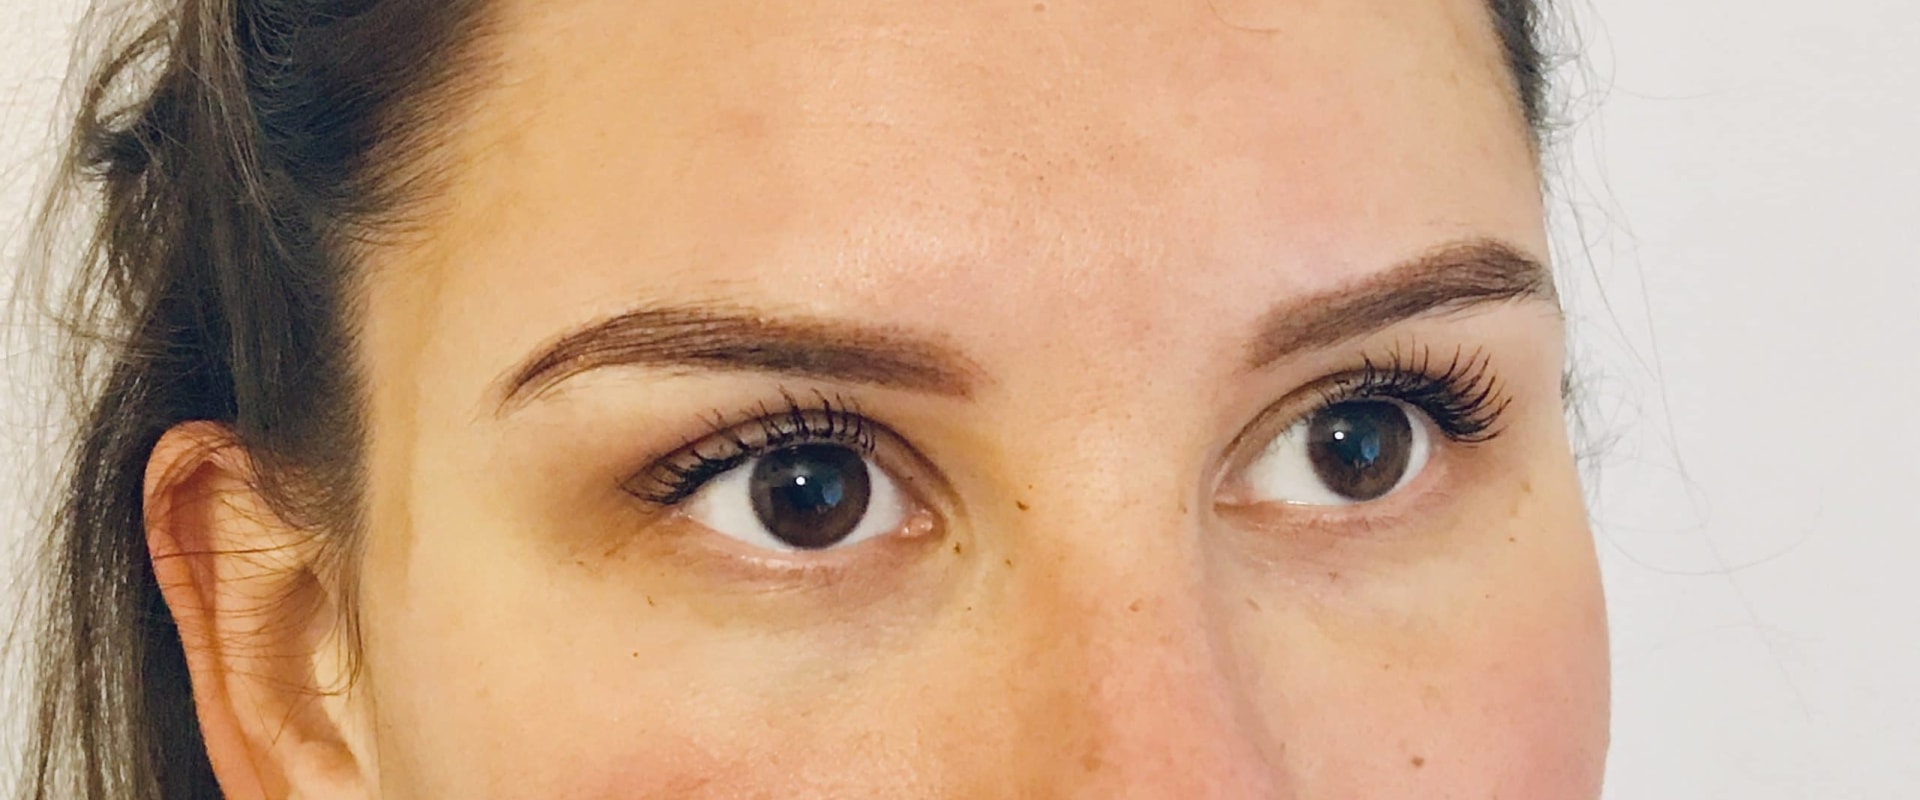 Will semi-permanent makeup completely fade?